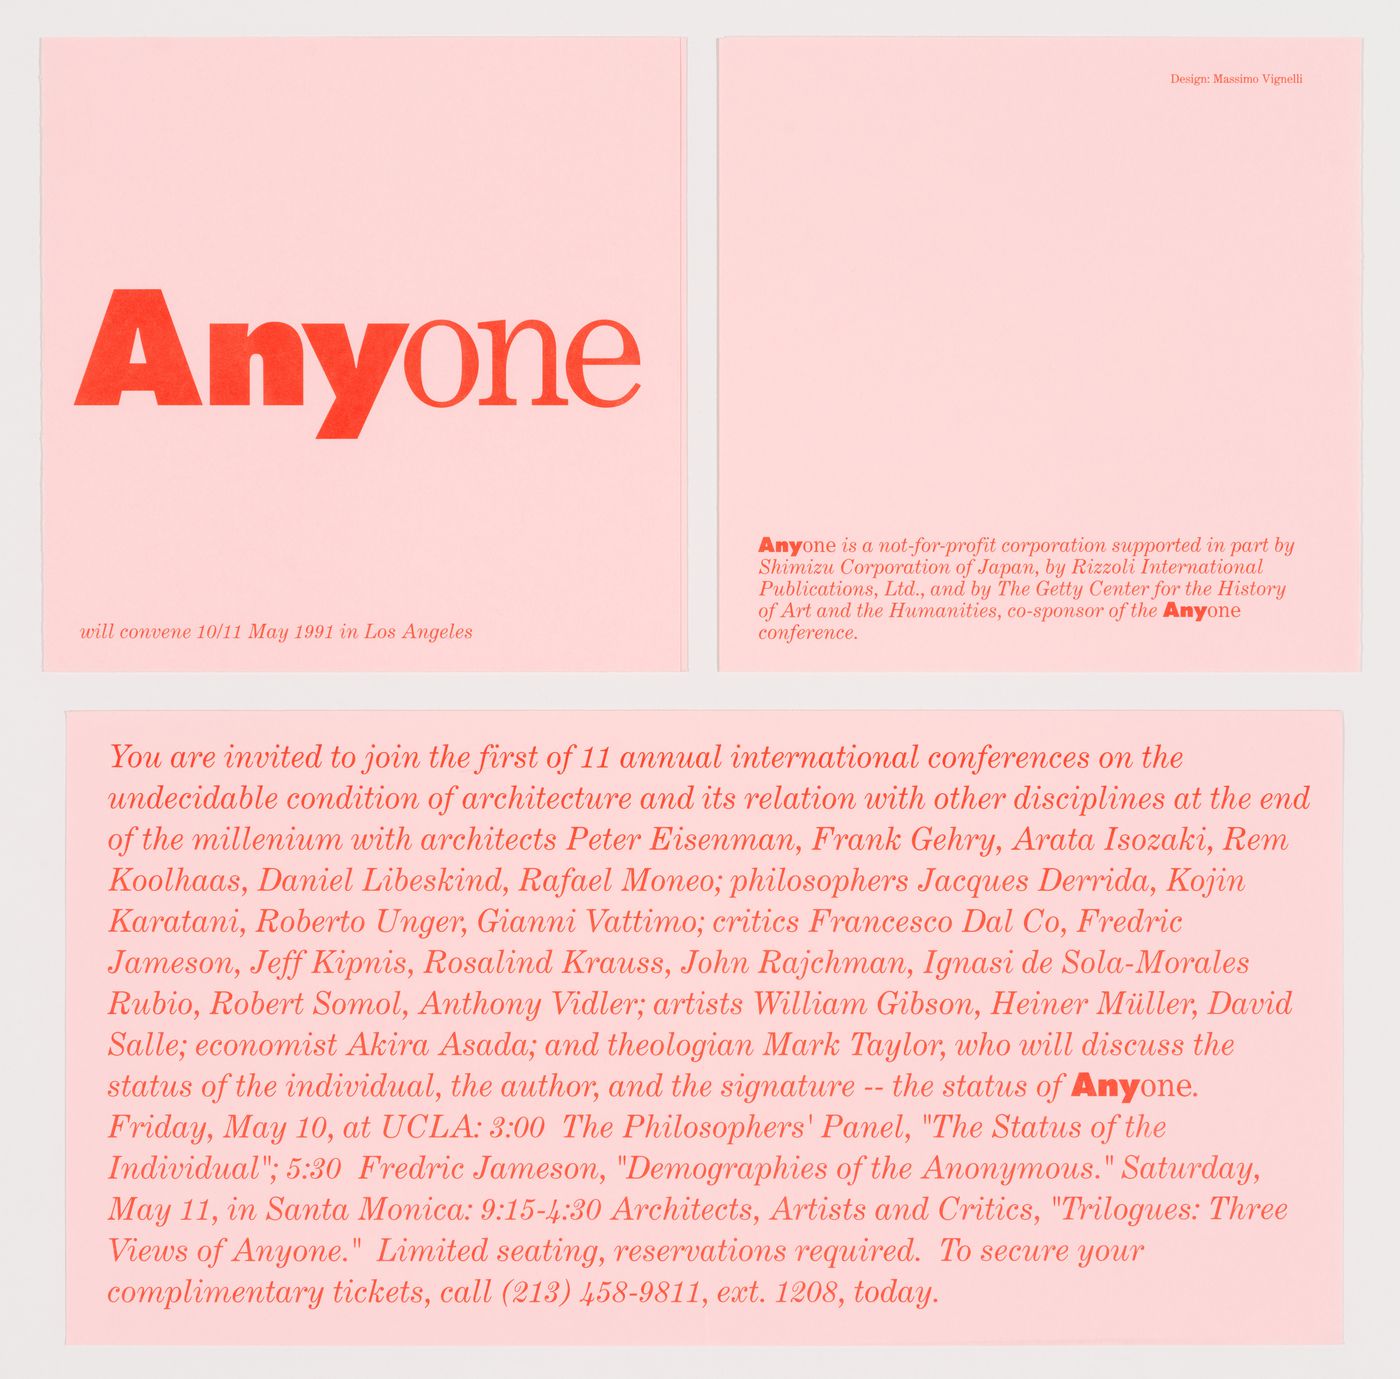 Invitation designed by Massimo Vignelli for the inaugural Any conference